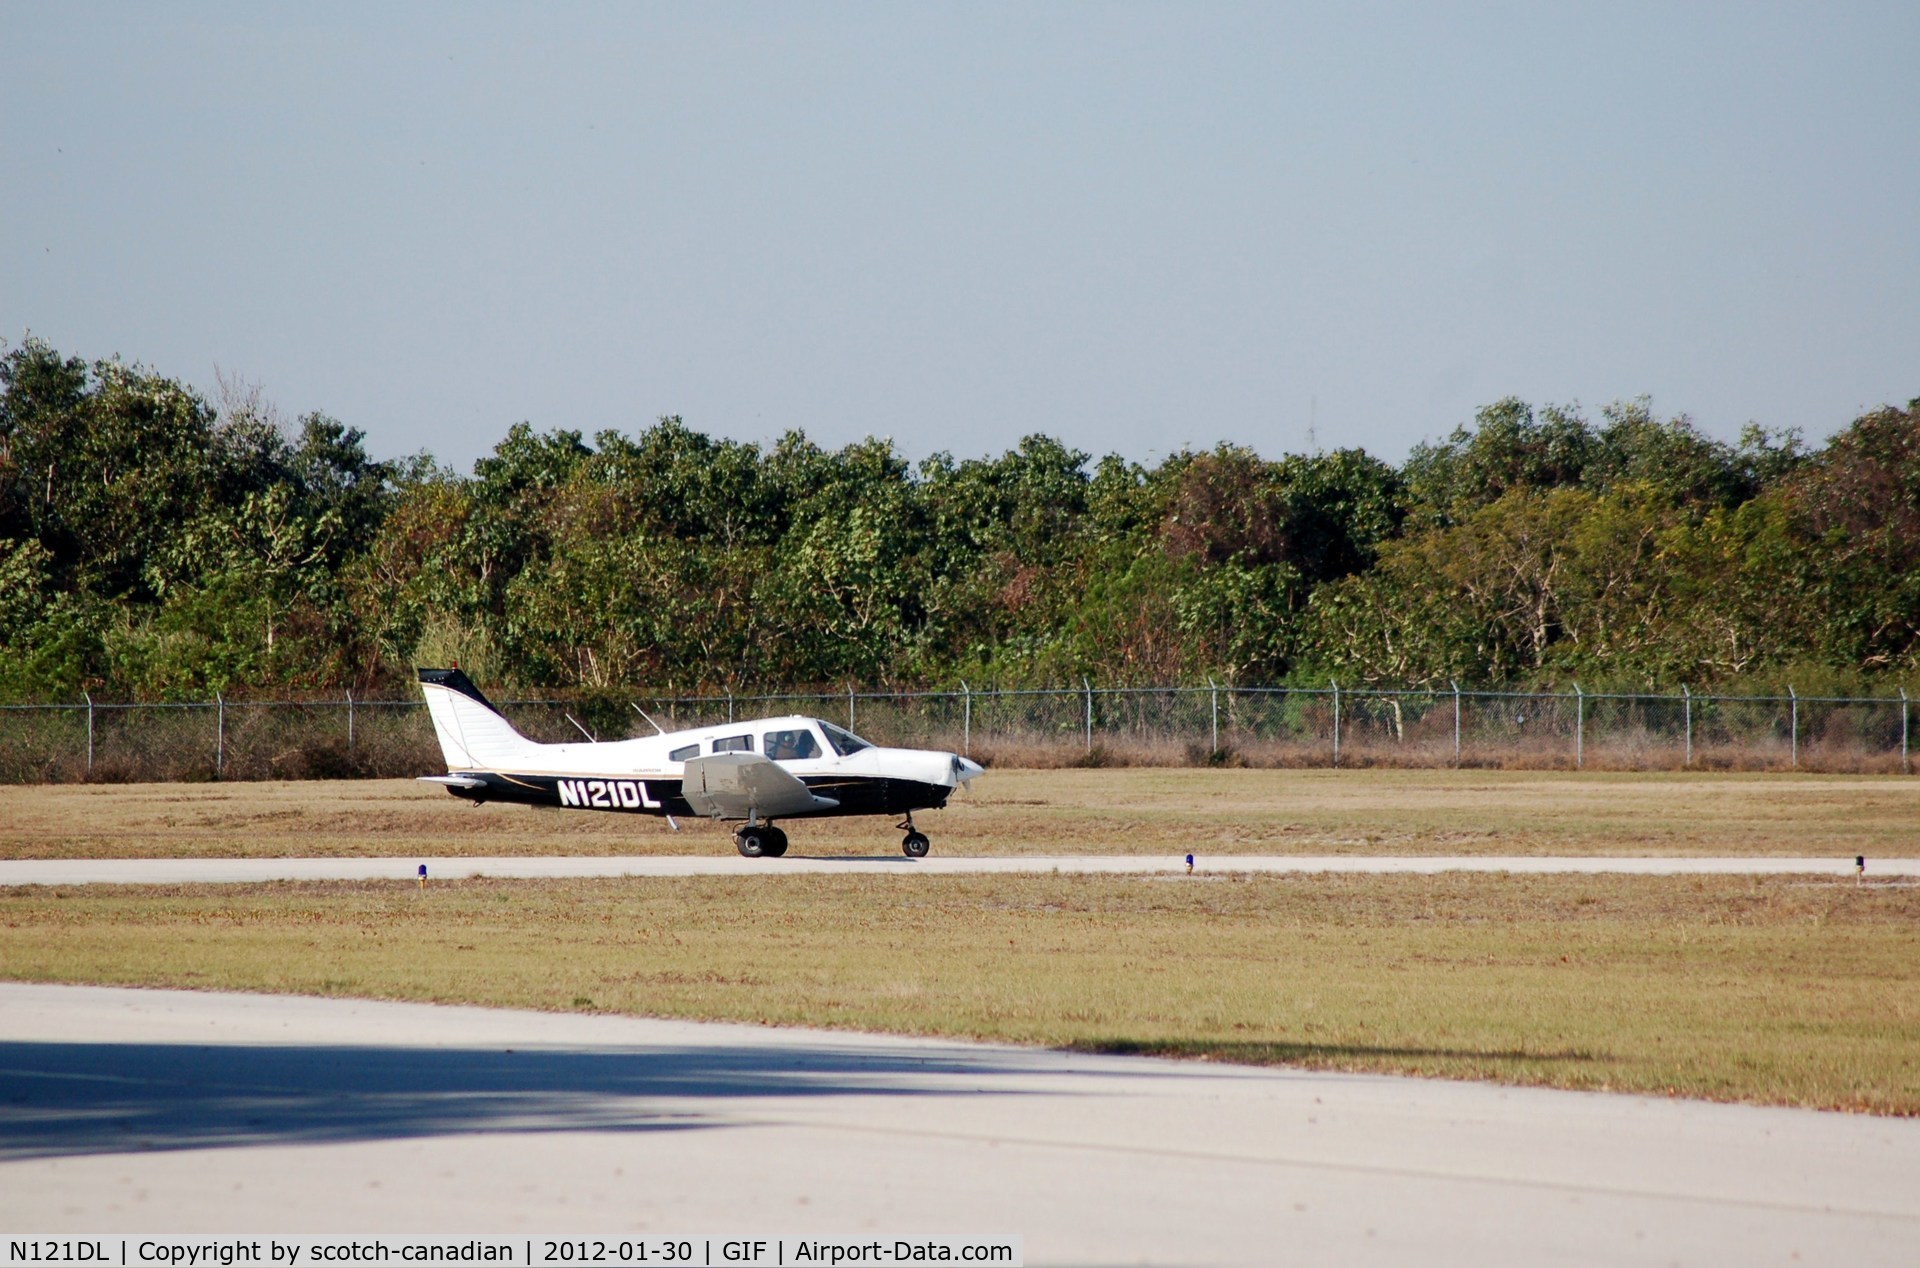 N121DL, 1979 Piper PA-28-161 C/N 28-8016115, 1979 Piper PA-28-161 N121DL at Gilbert Airport, Winter Haven, FL